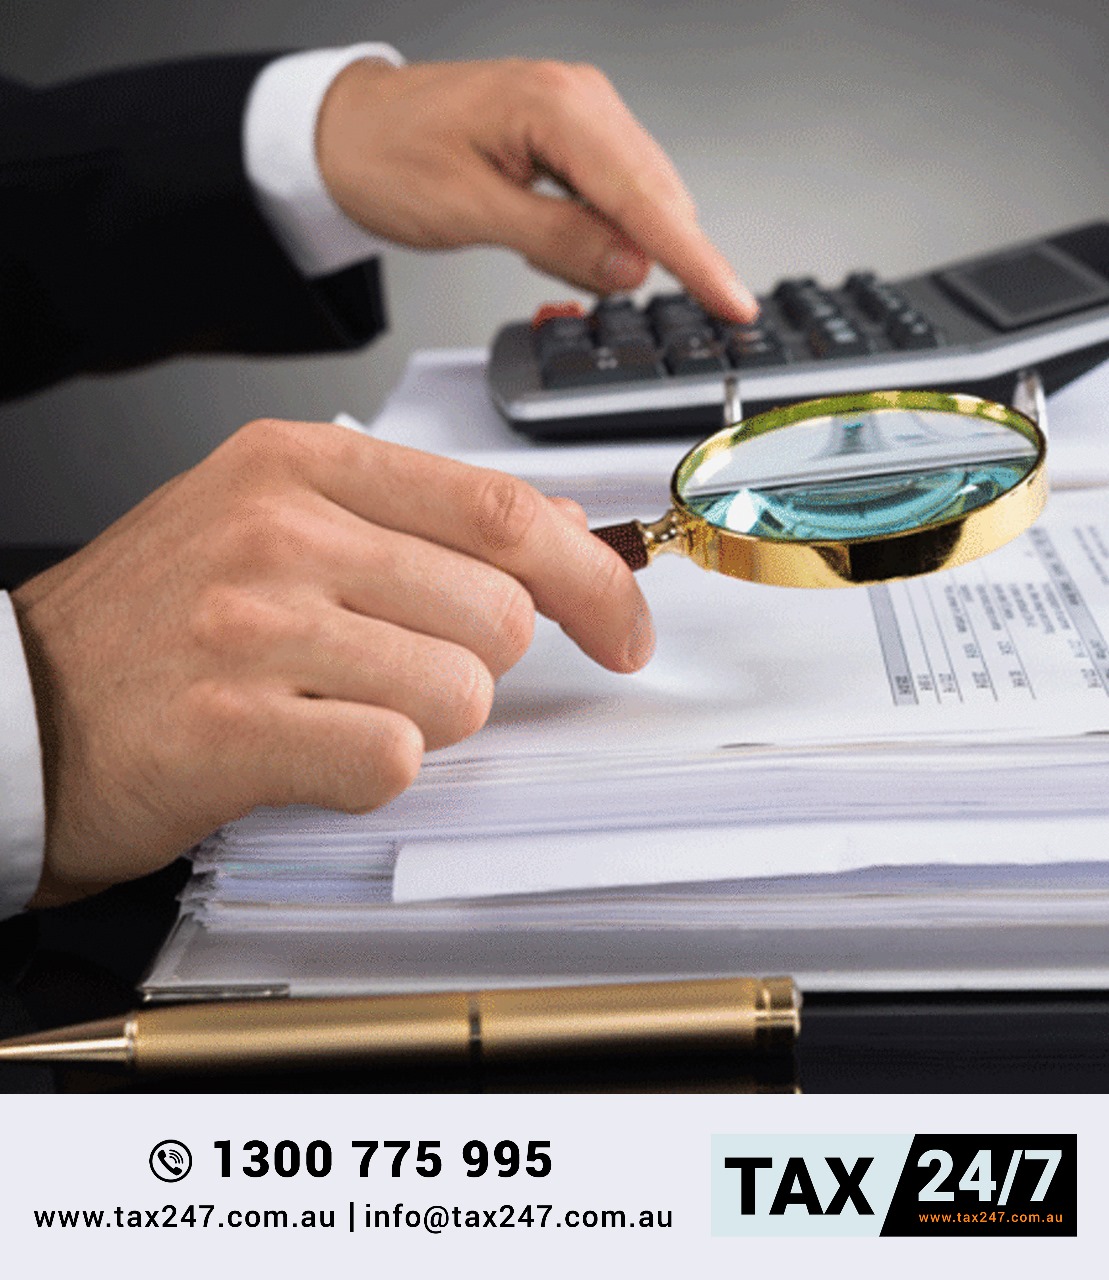 Are you tired of complicated tax calculations and paper filing your lodging tax return? - Brisbane Professional Services